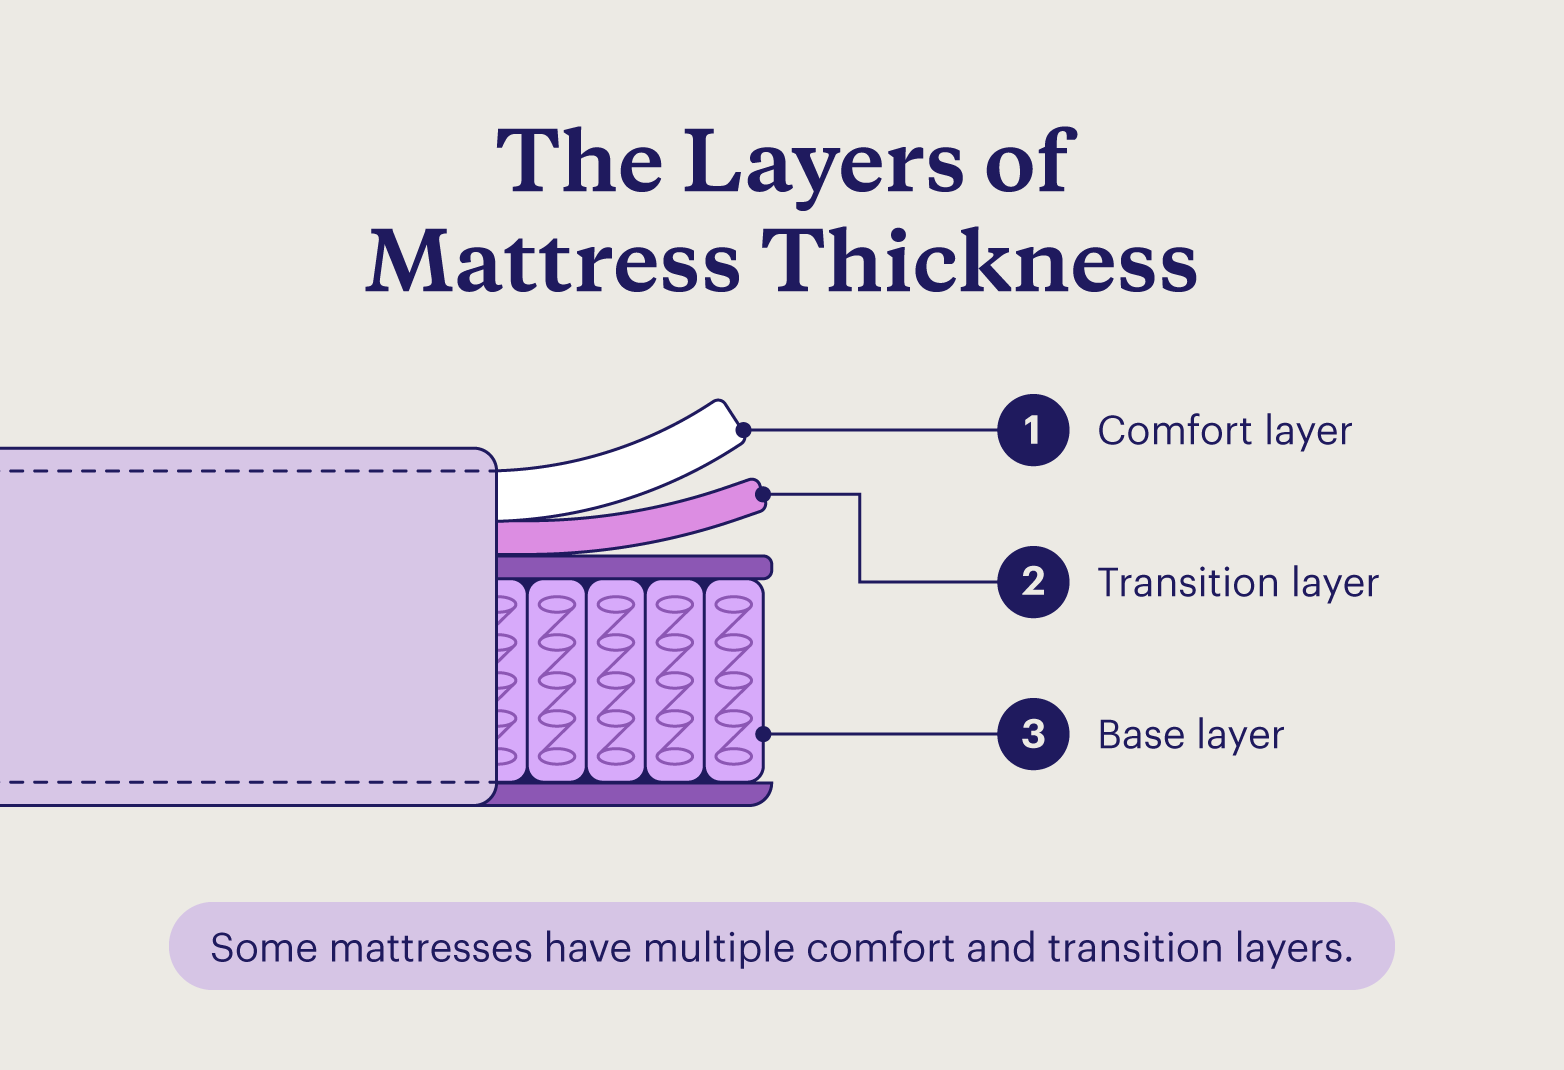 An illustration lists the layers that make up a bed and influence mattress thickness.